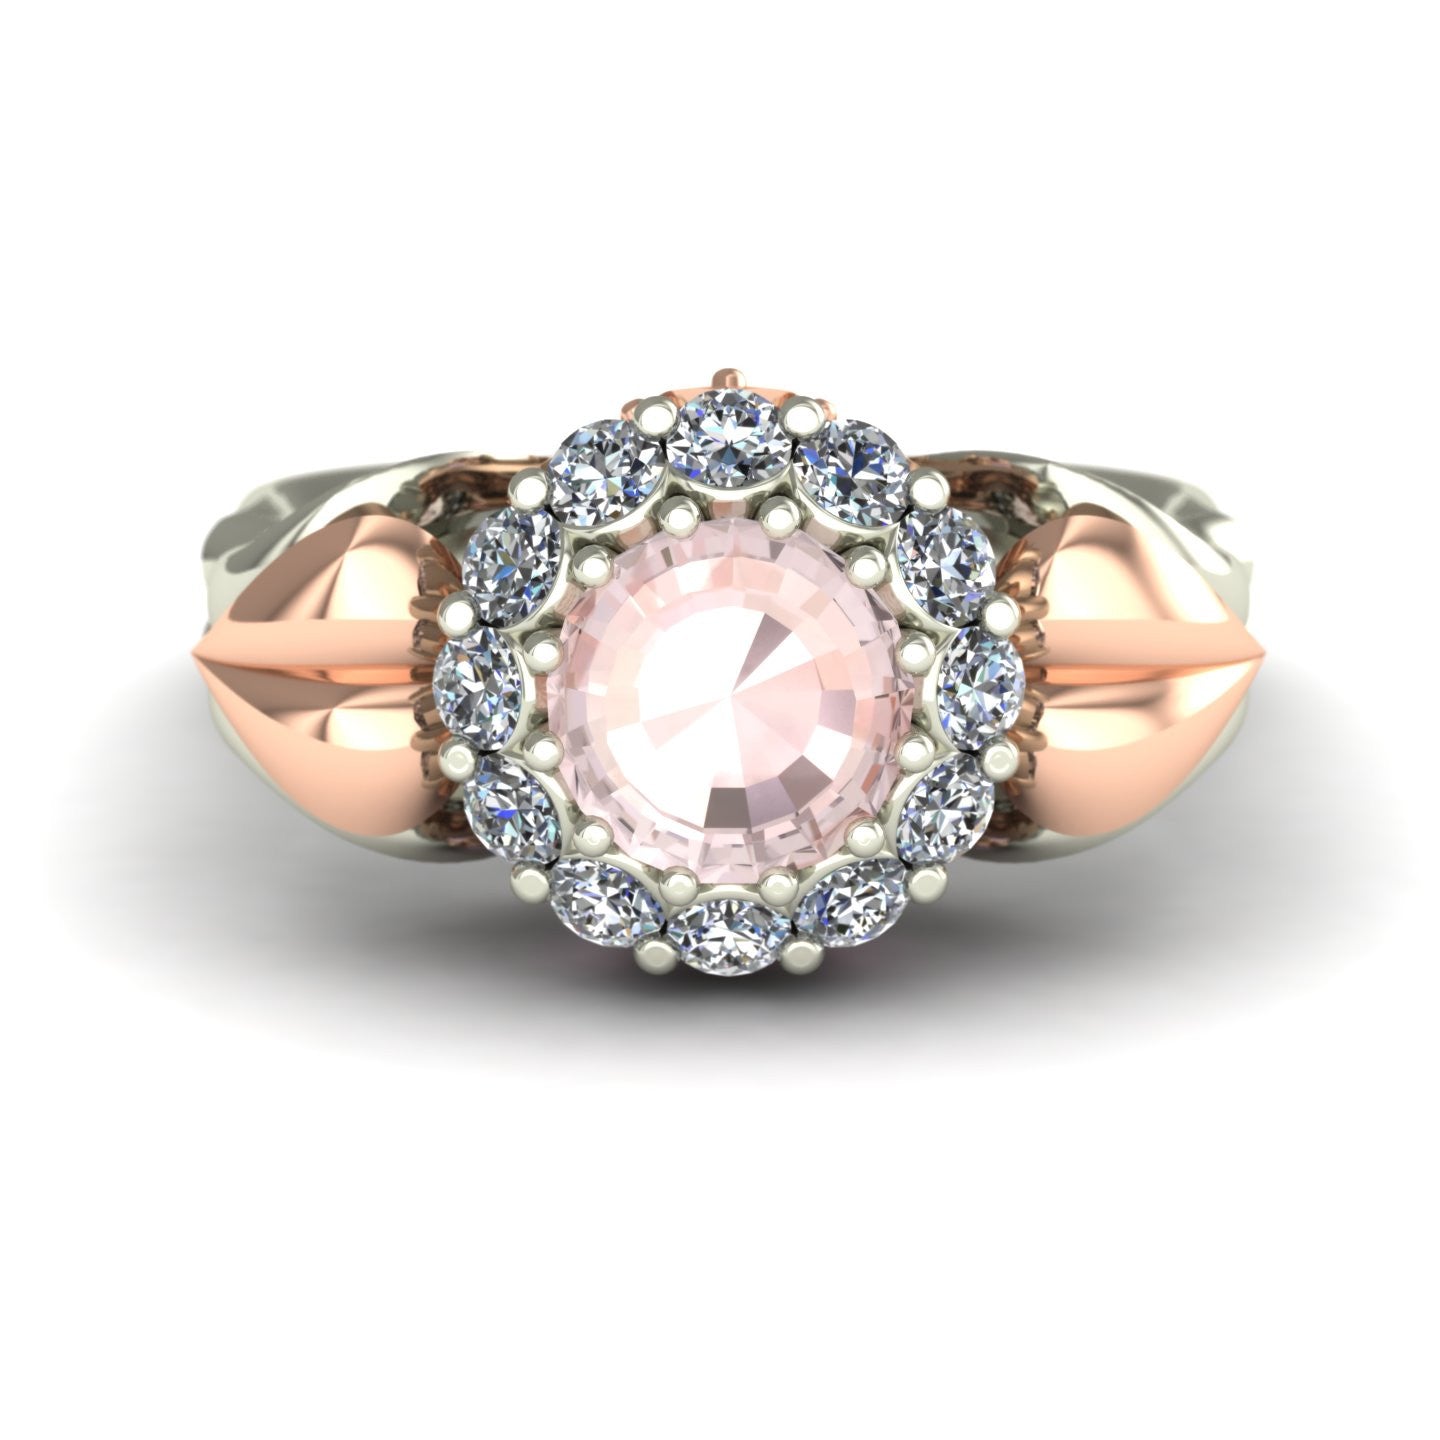 Morganite two tone flower ring with pink diamonds in 14k rose and white gold - Charles Babb Designs - top view